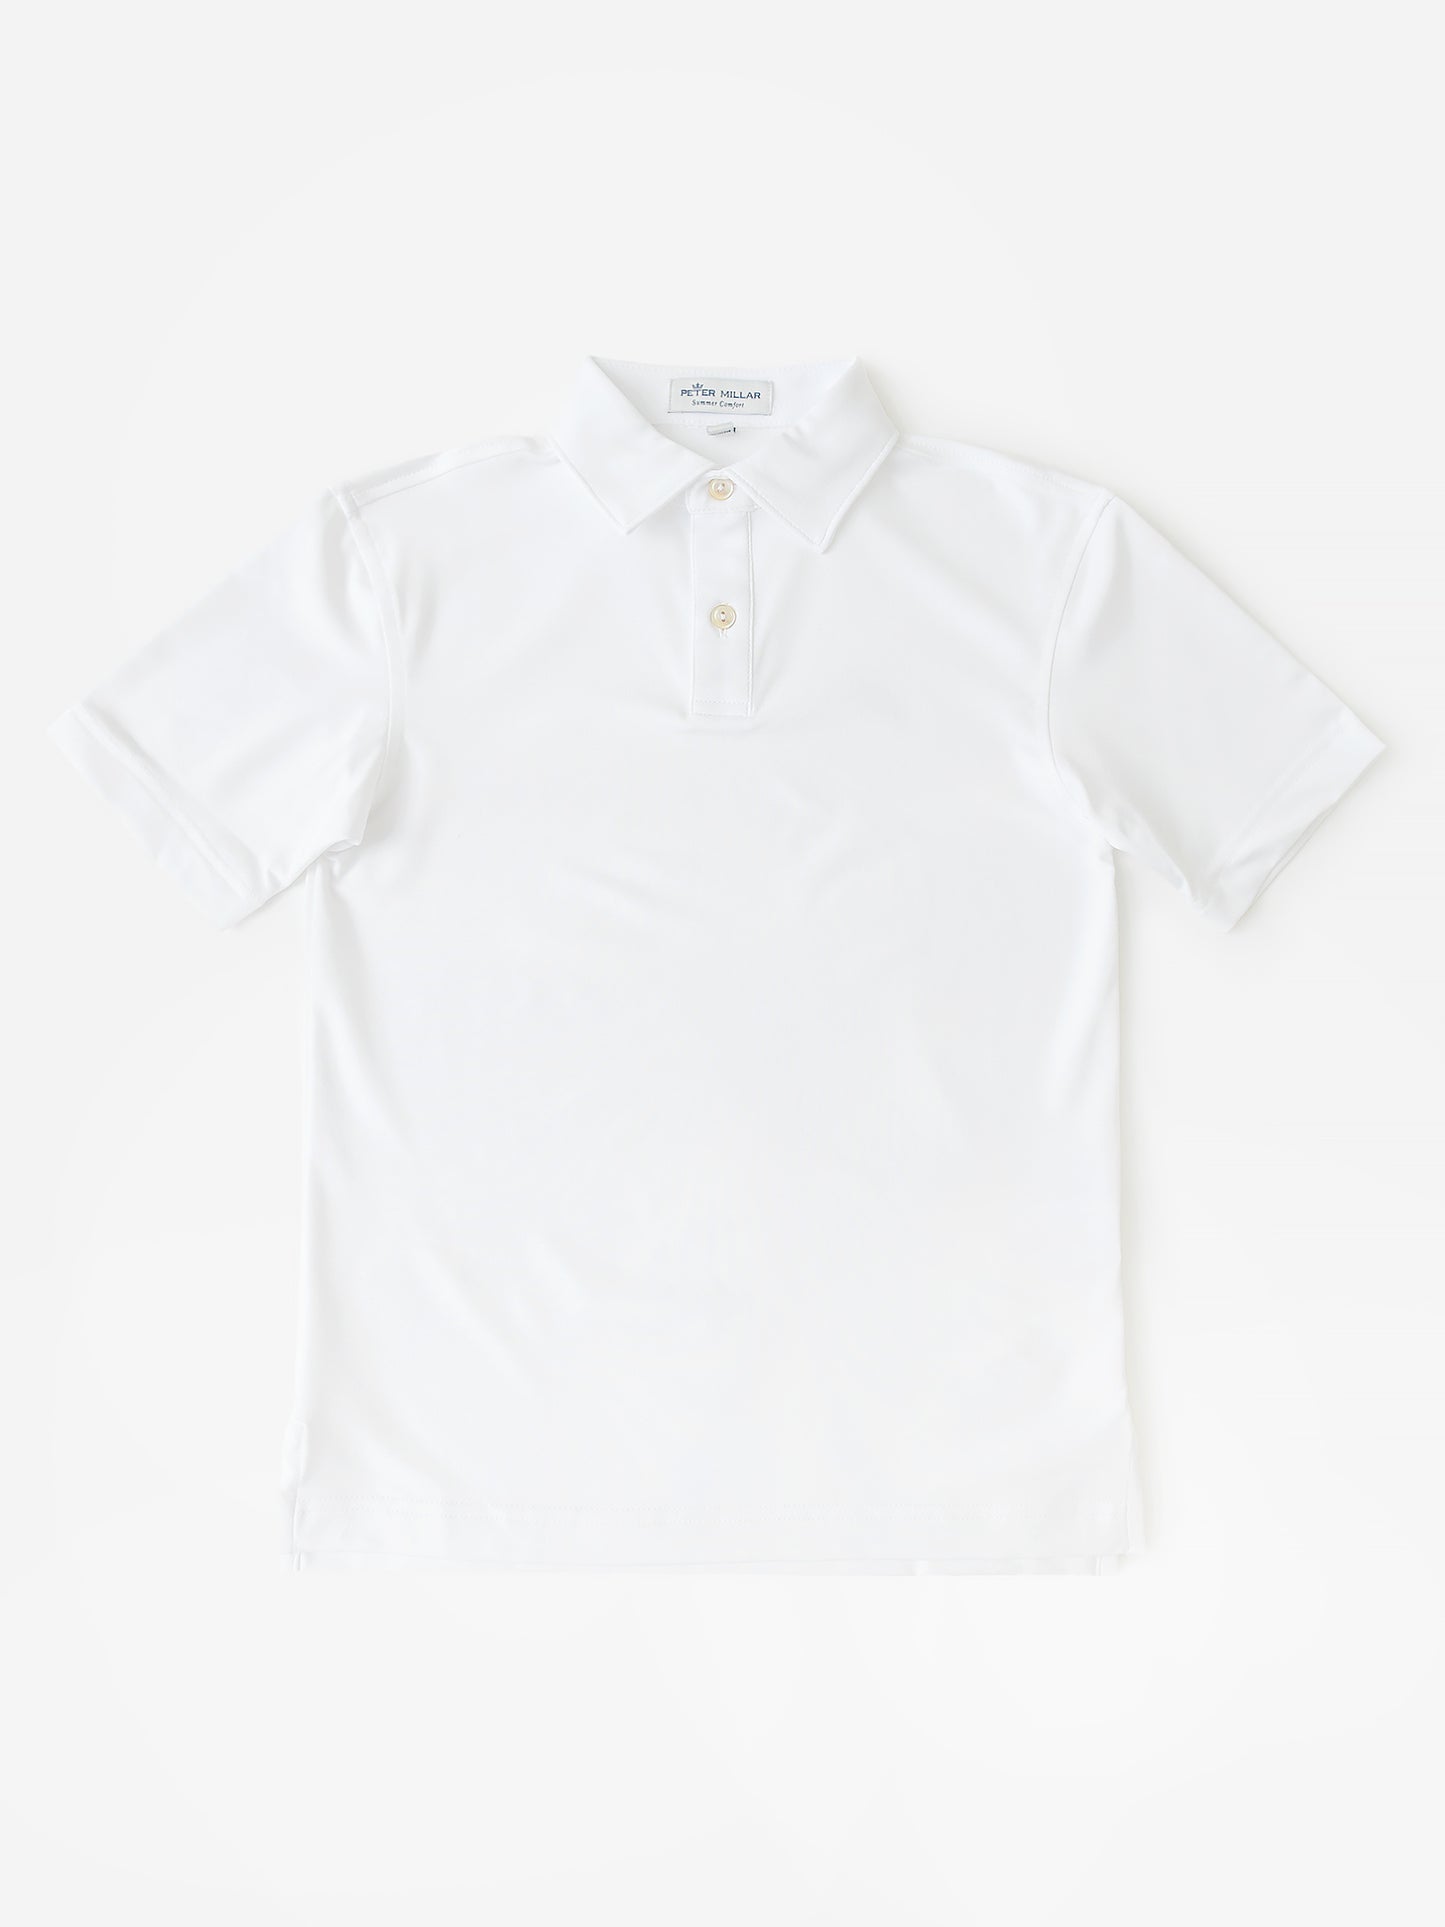 Peter Millar Youth Collection Boys' Solid Performance Jersey Polo